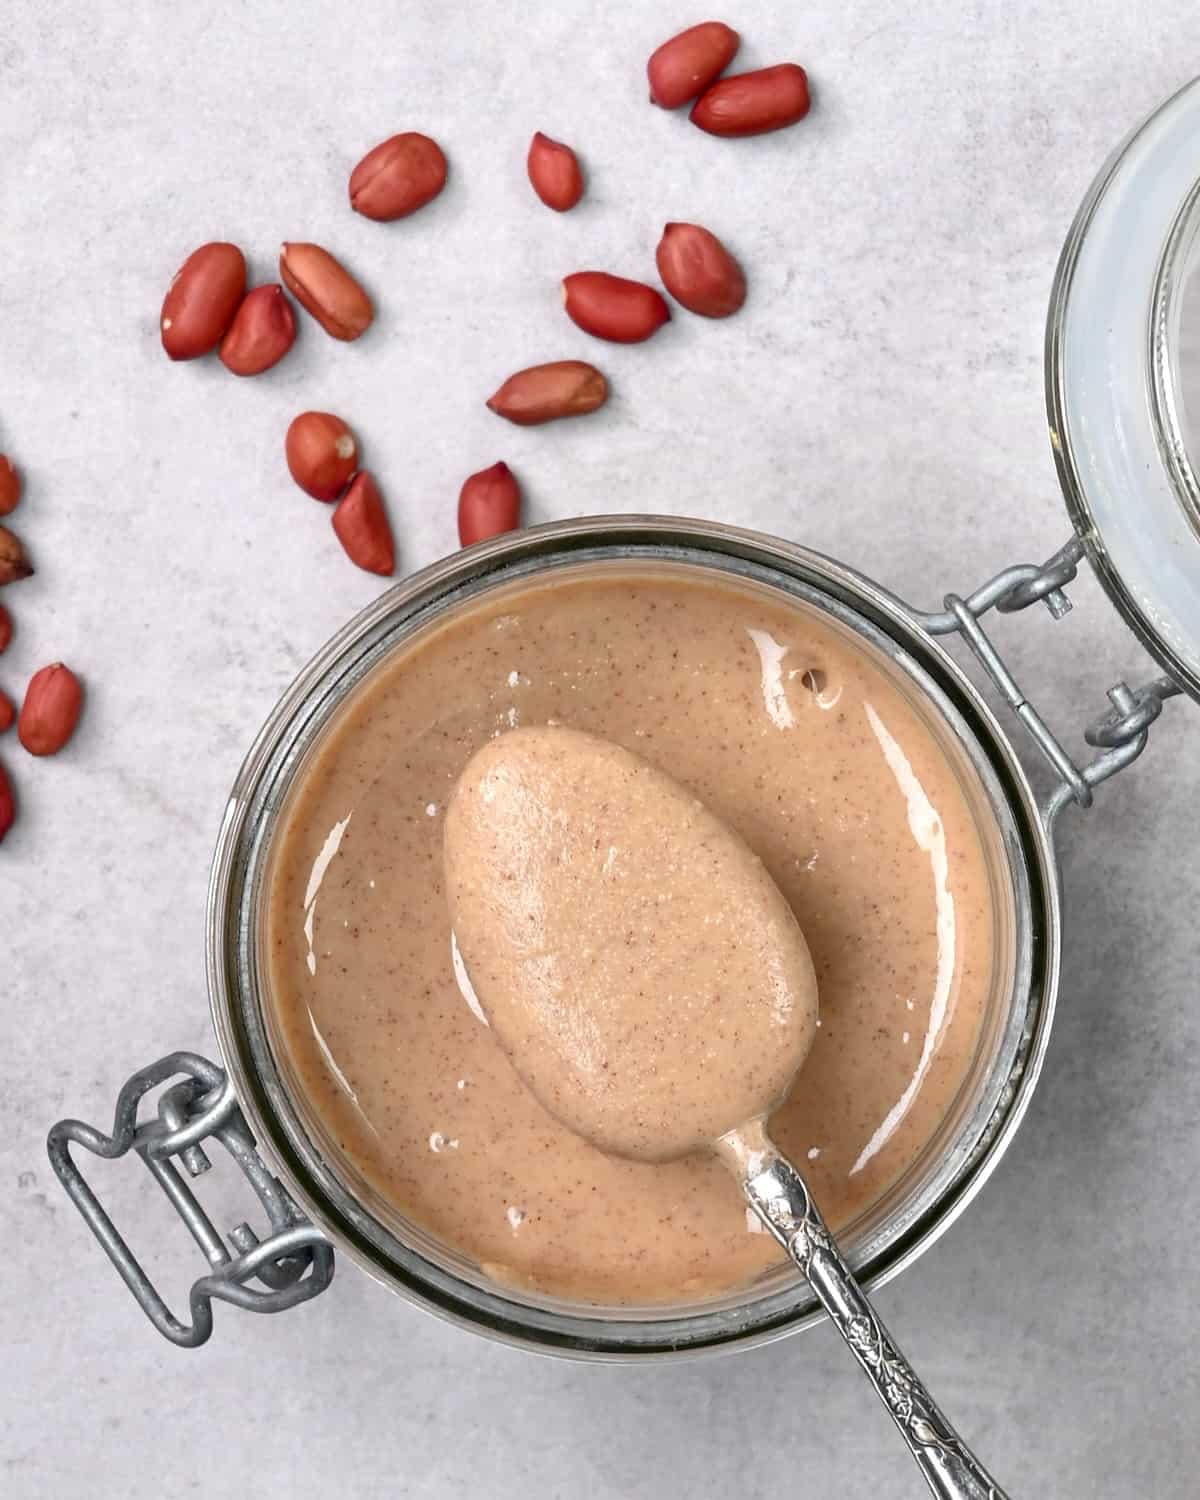 A spoonful of homemade peanut butter